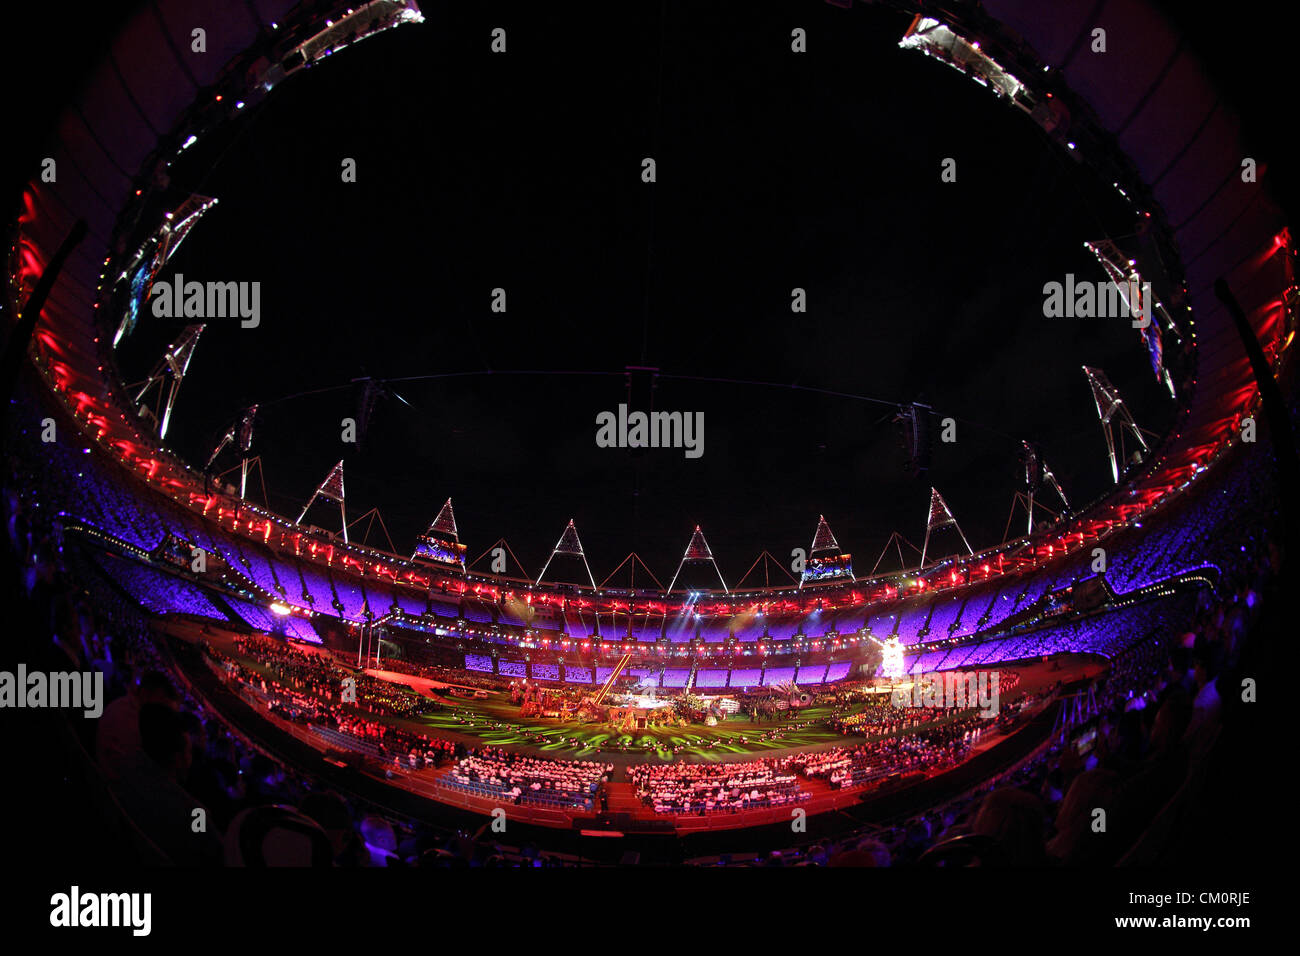 09.09.2012. London, England. A general view of the Olympic Stadium during the Closing Ceremony of the London 2012 Paralympic Games. Stock Photo